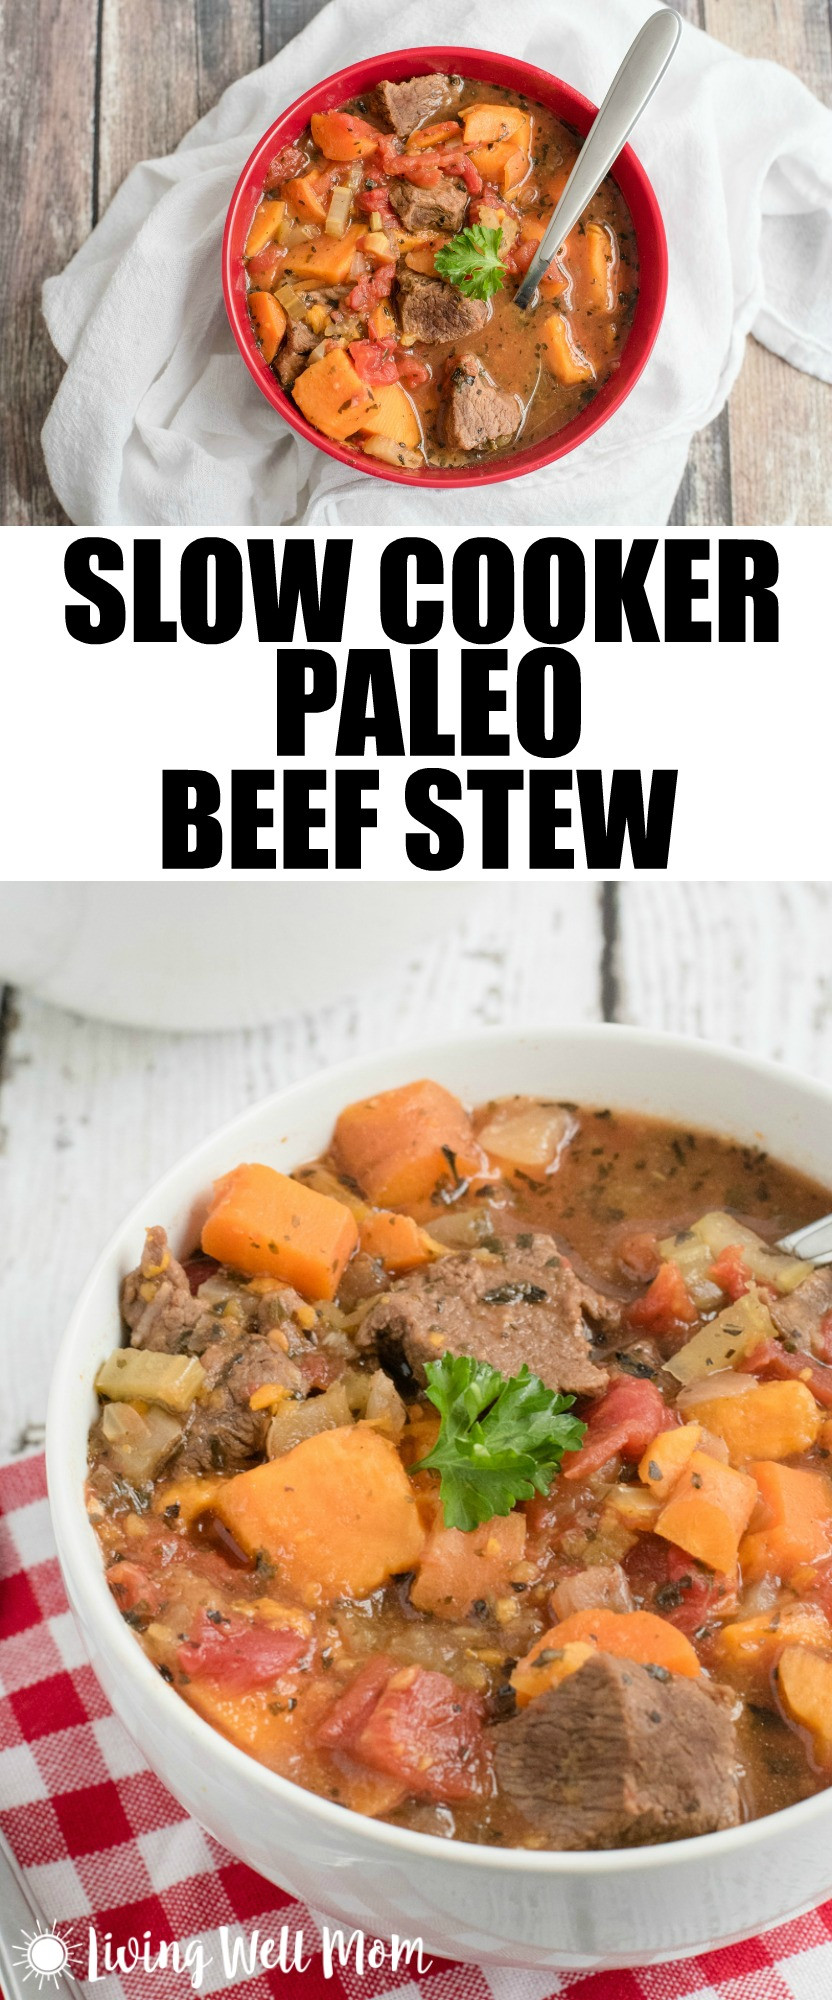 Heart Healthy Beef Recipes
 Slow Cooker Paleo Beef Stew Living Well Mom